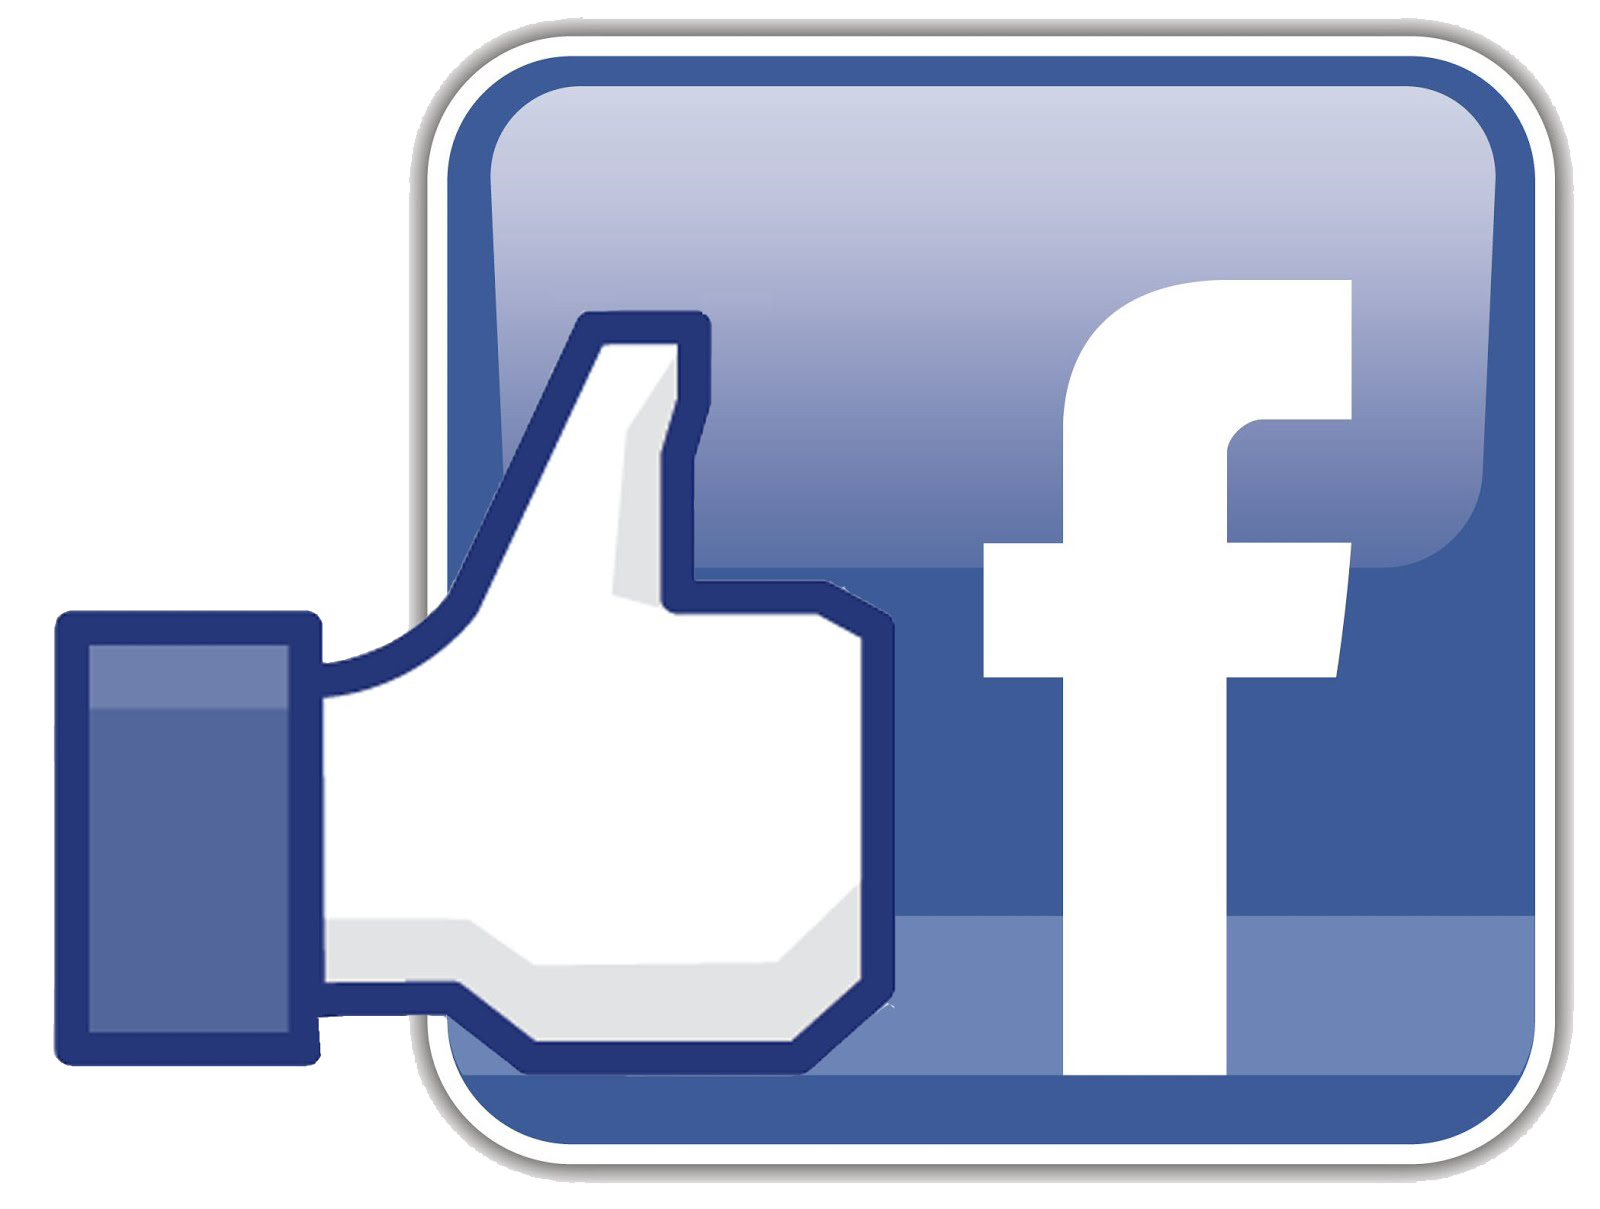 Facebook transparent logo #38357 - Free Icons and PNG ...